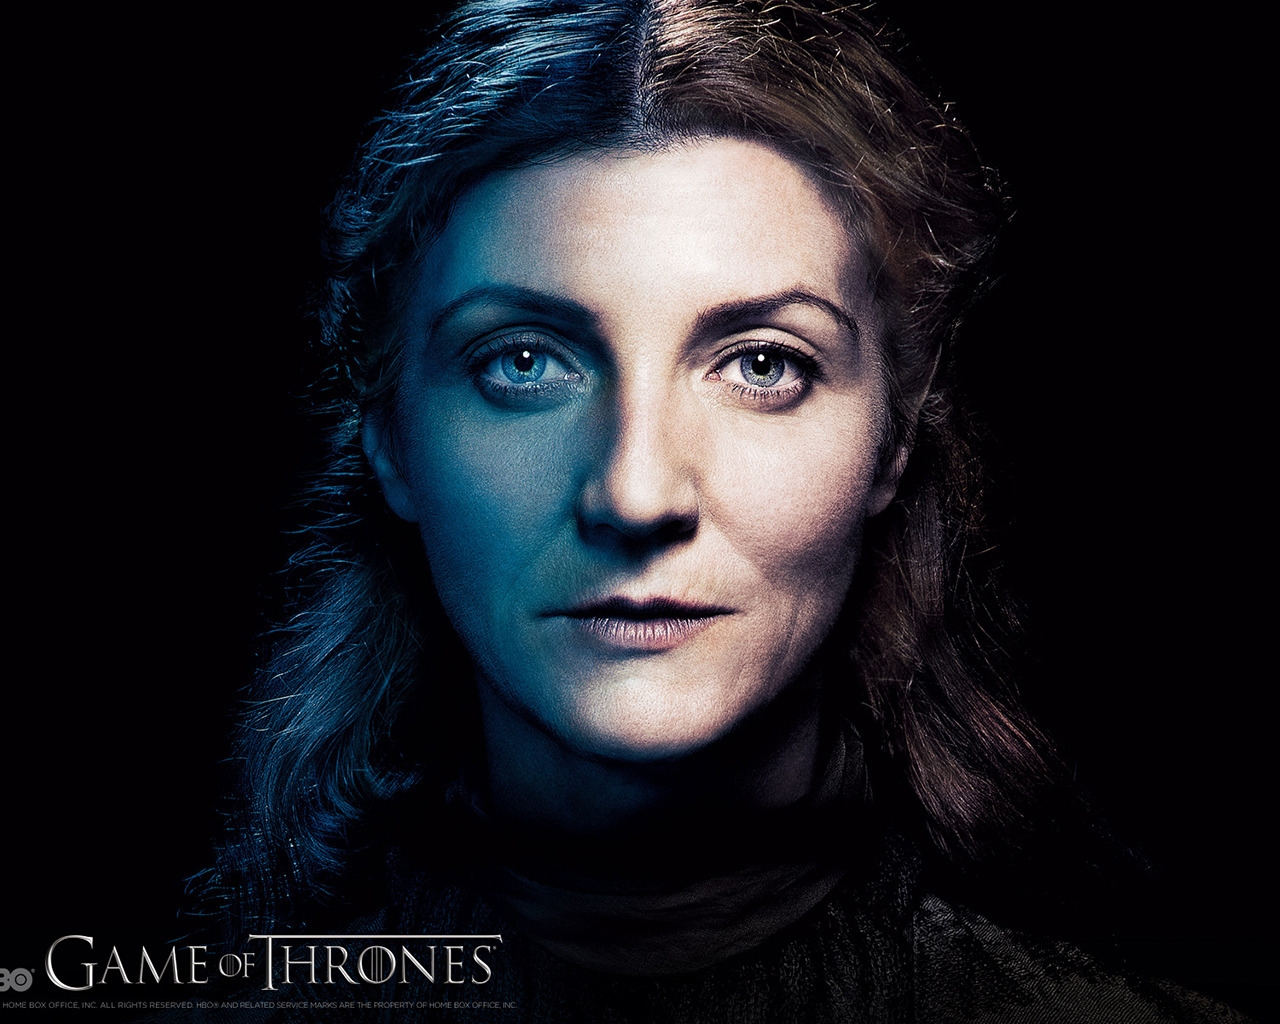 Catelyn Stark in Game of Thrones for 1280 x 1024 resolution